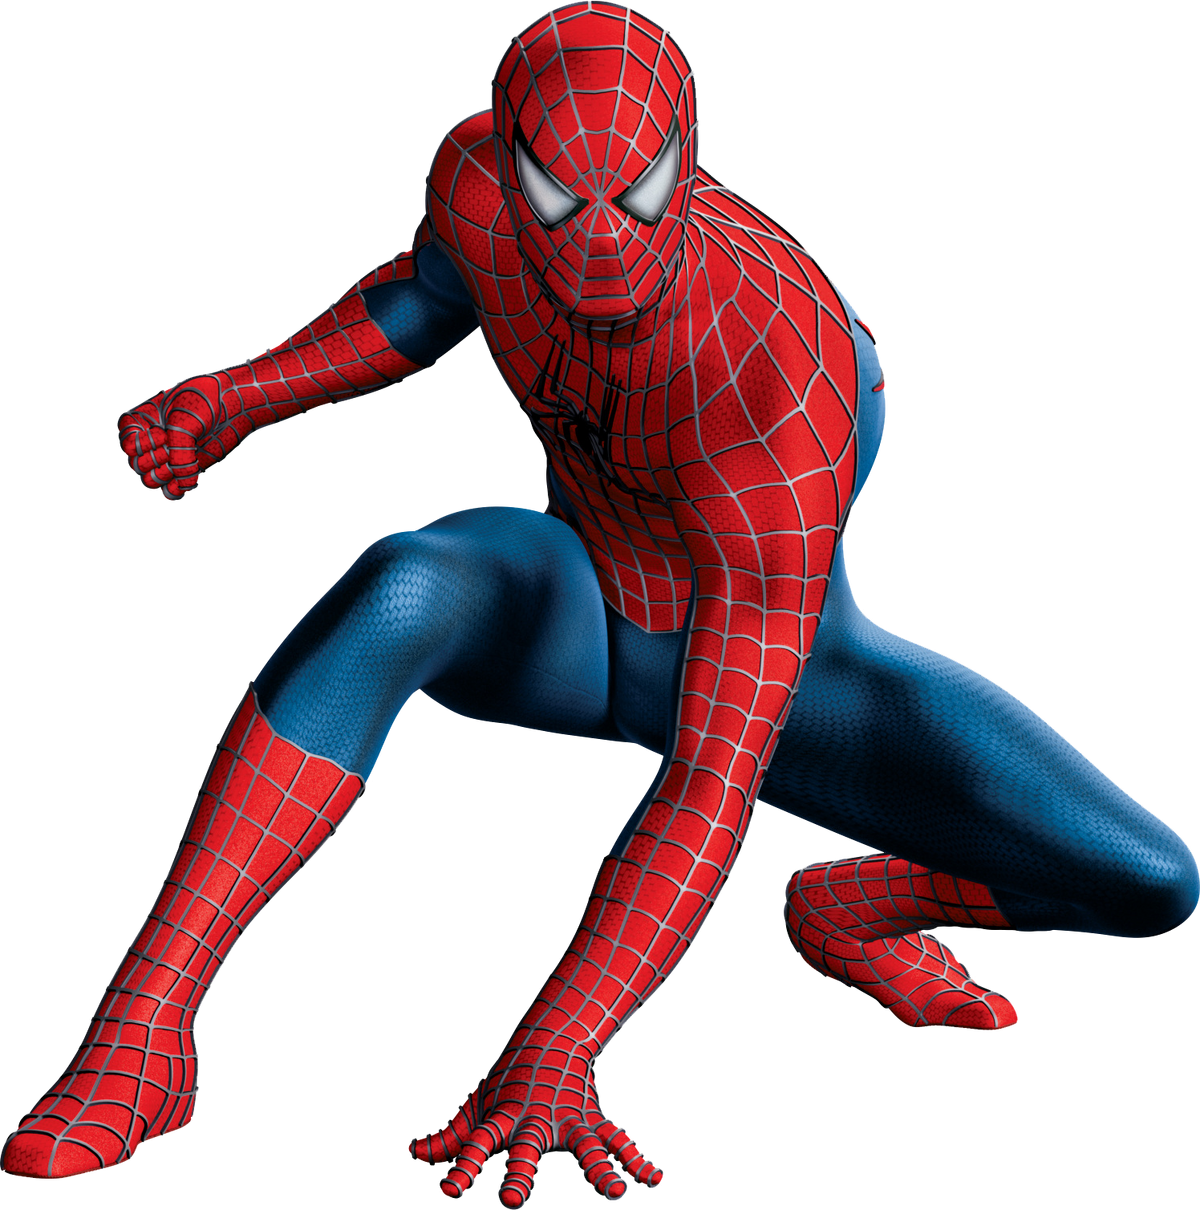 SPIDER-MAN™ 2  Sony Pictures Entertainment